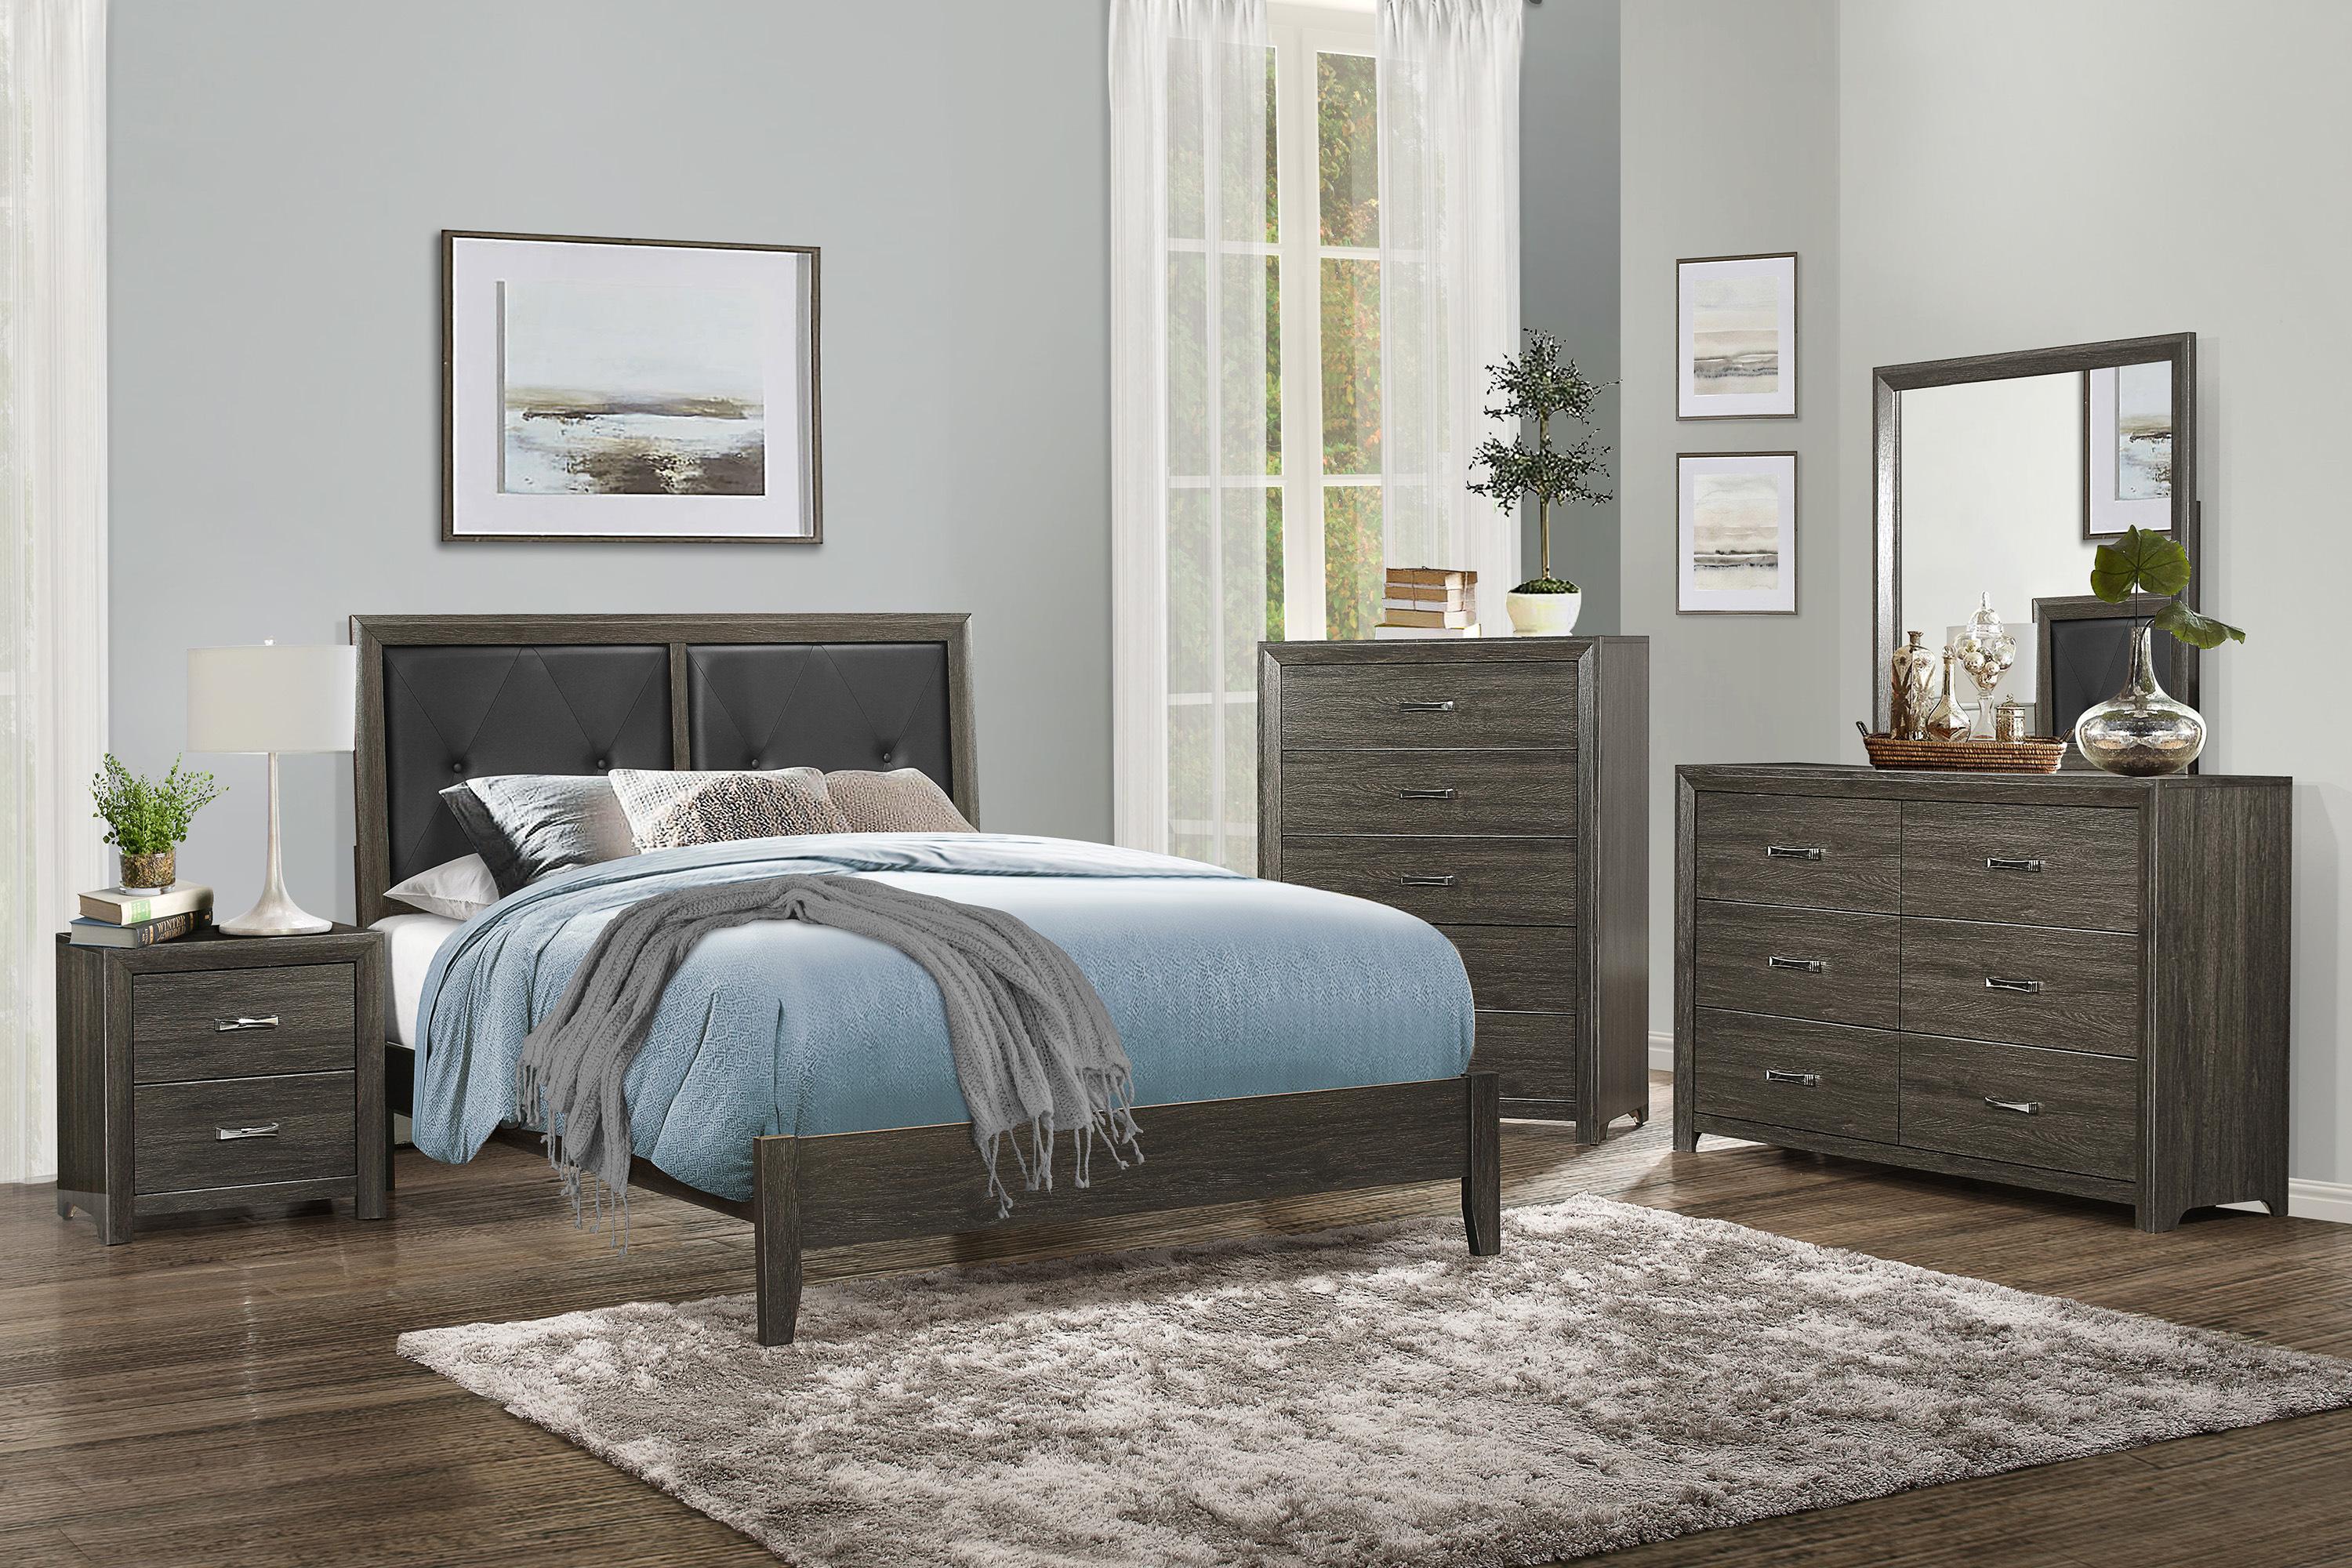 Contemporary Bedroom Set 2145KNP-1CK-5PC Edina 2145KNP-1CK-5PC in Dark Gray Faux Leather